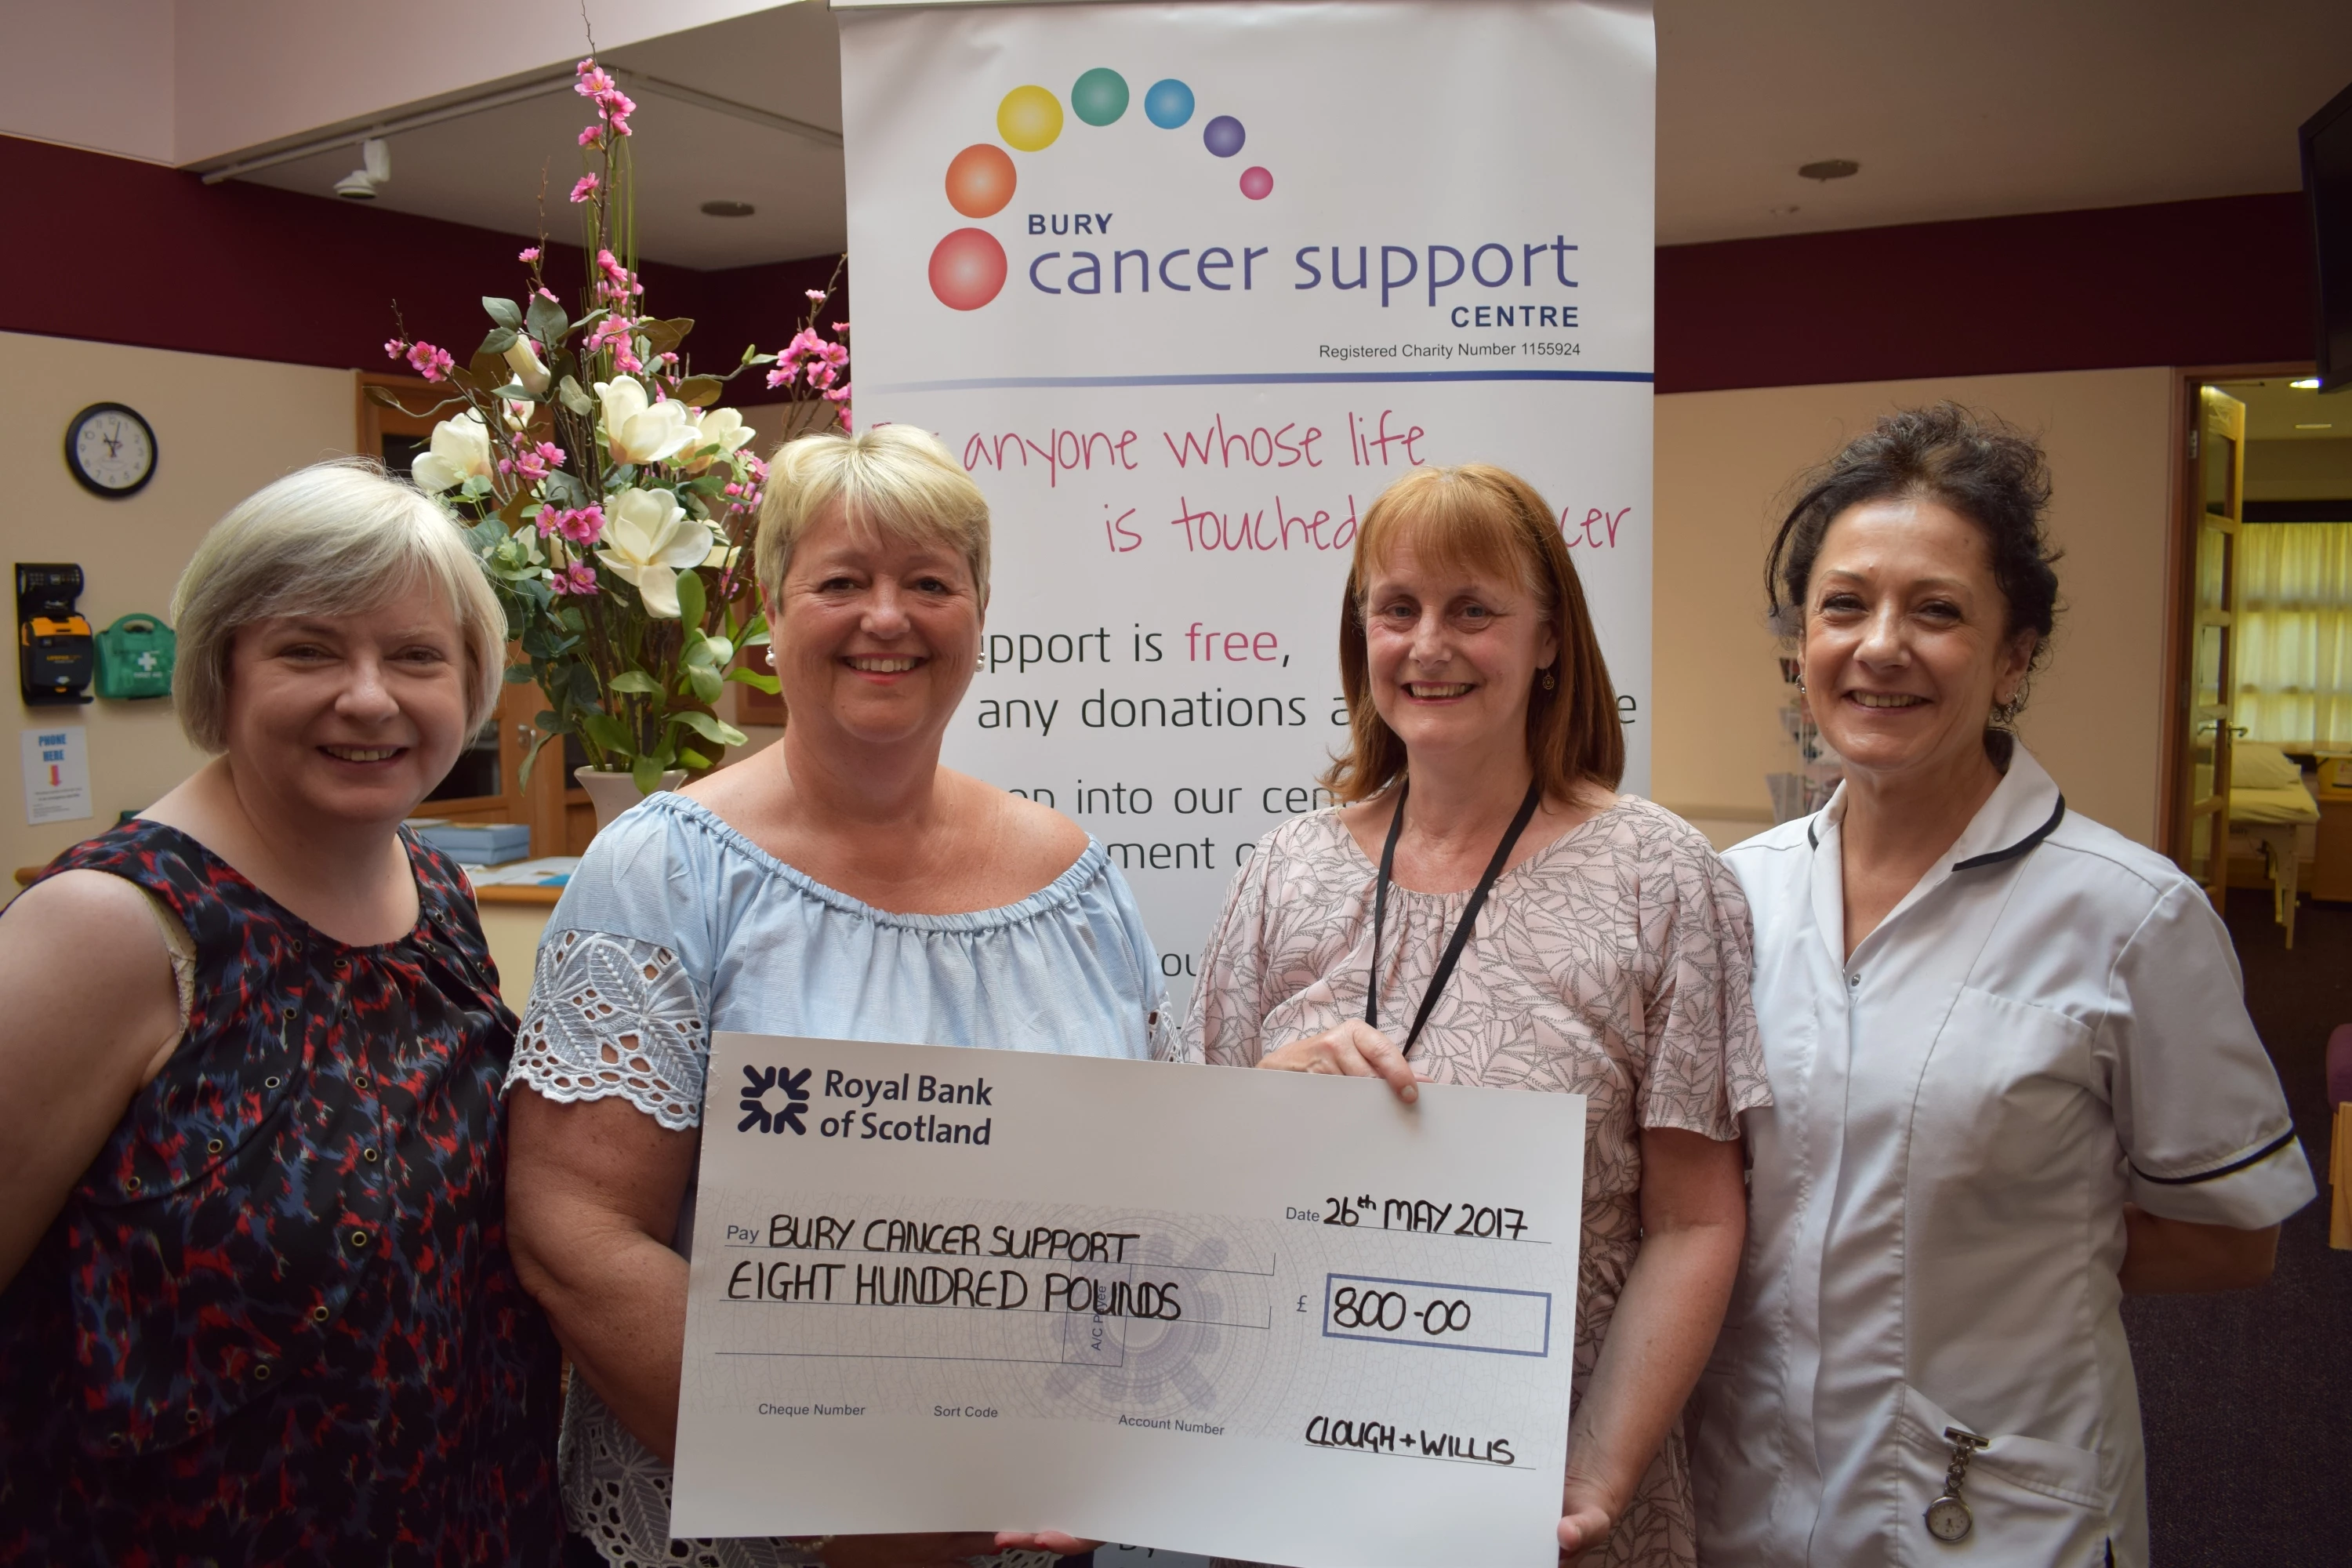 Shefali Talukdar & Karen Hastie (Clough & Willis) with Janet Pearce-Langton and Lynne Marland (Bury Cancer Support Centre)